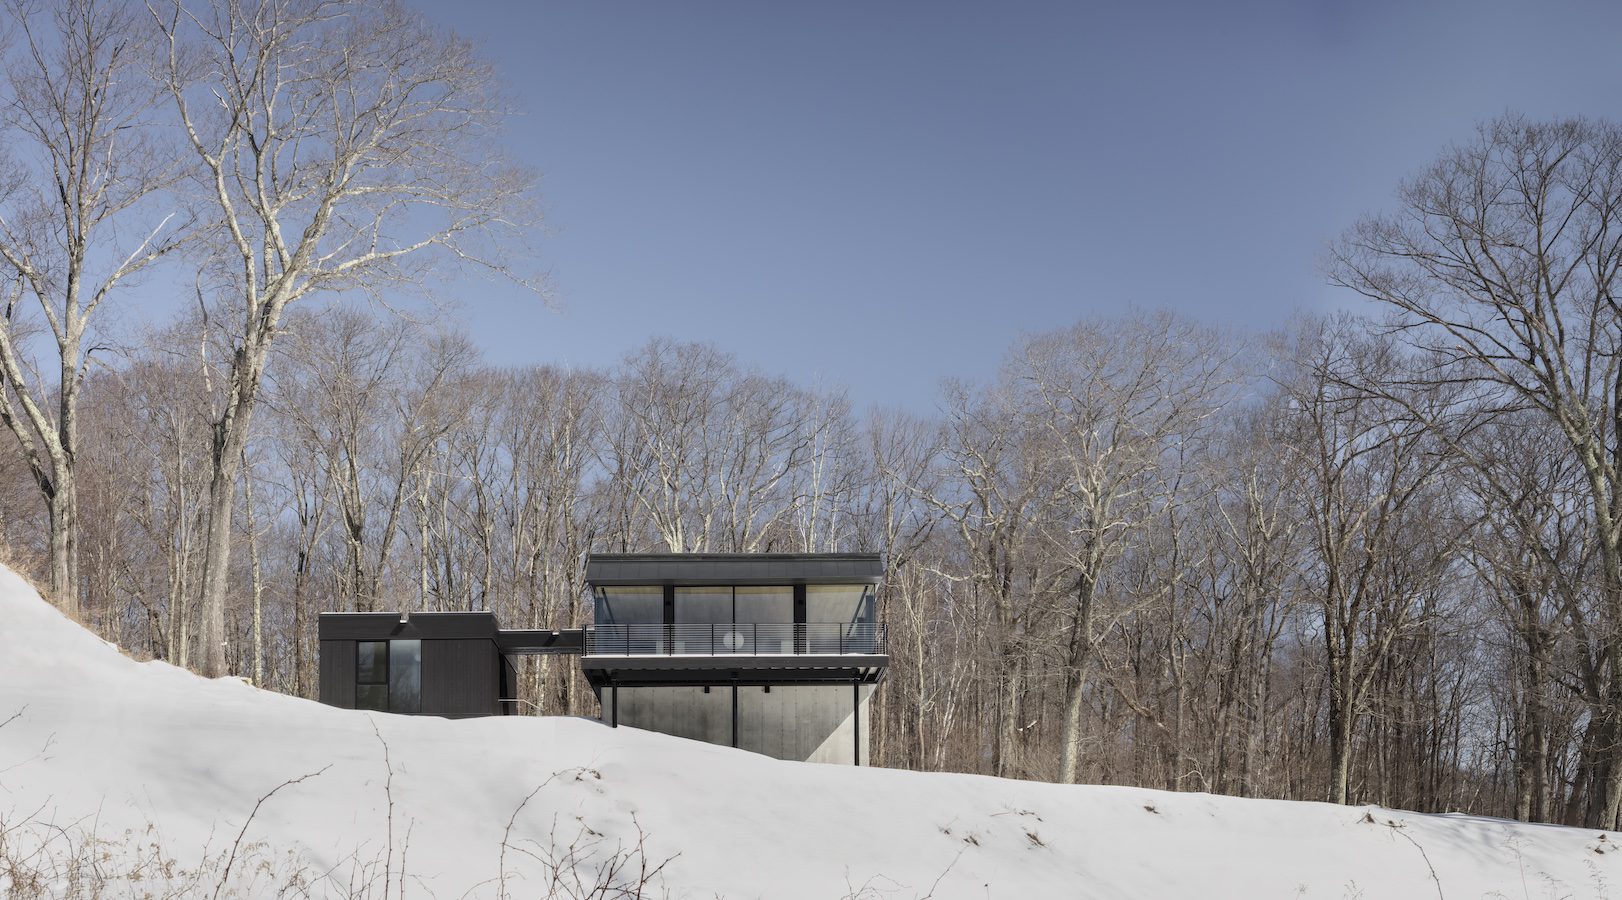 A modern residential house sits on top of a snowy hill, showcasing innovative structural design.